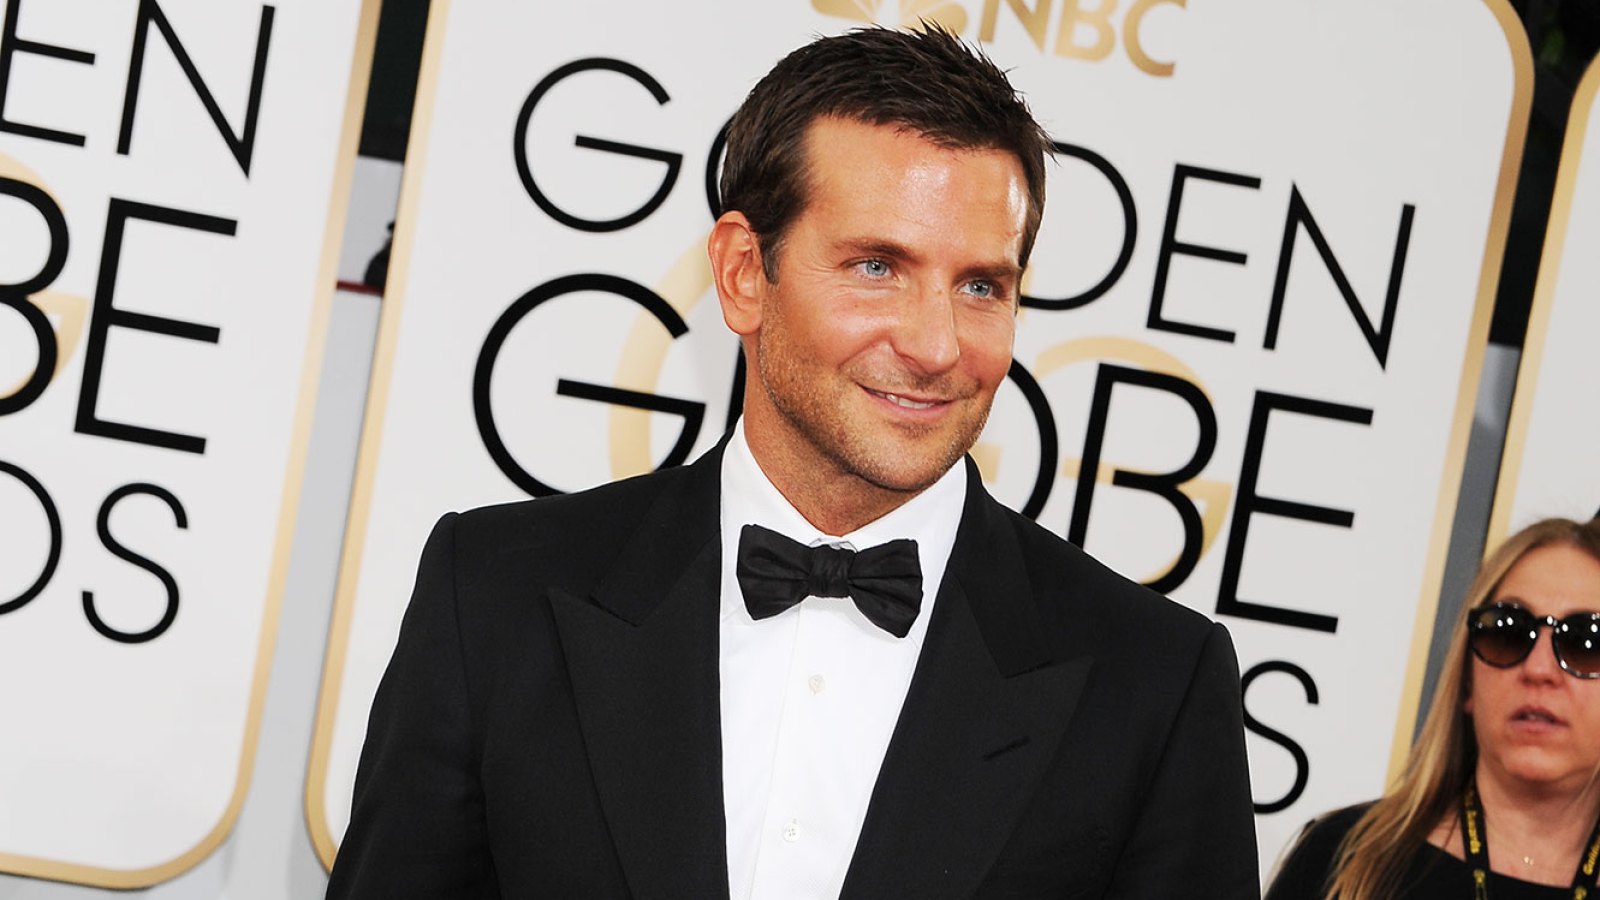 Bradley Cooper’s Stylist Ilaria Urbinati Says the Actor Has a ‘Strong Mind’ When It Comes to Fashion